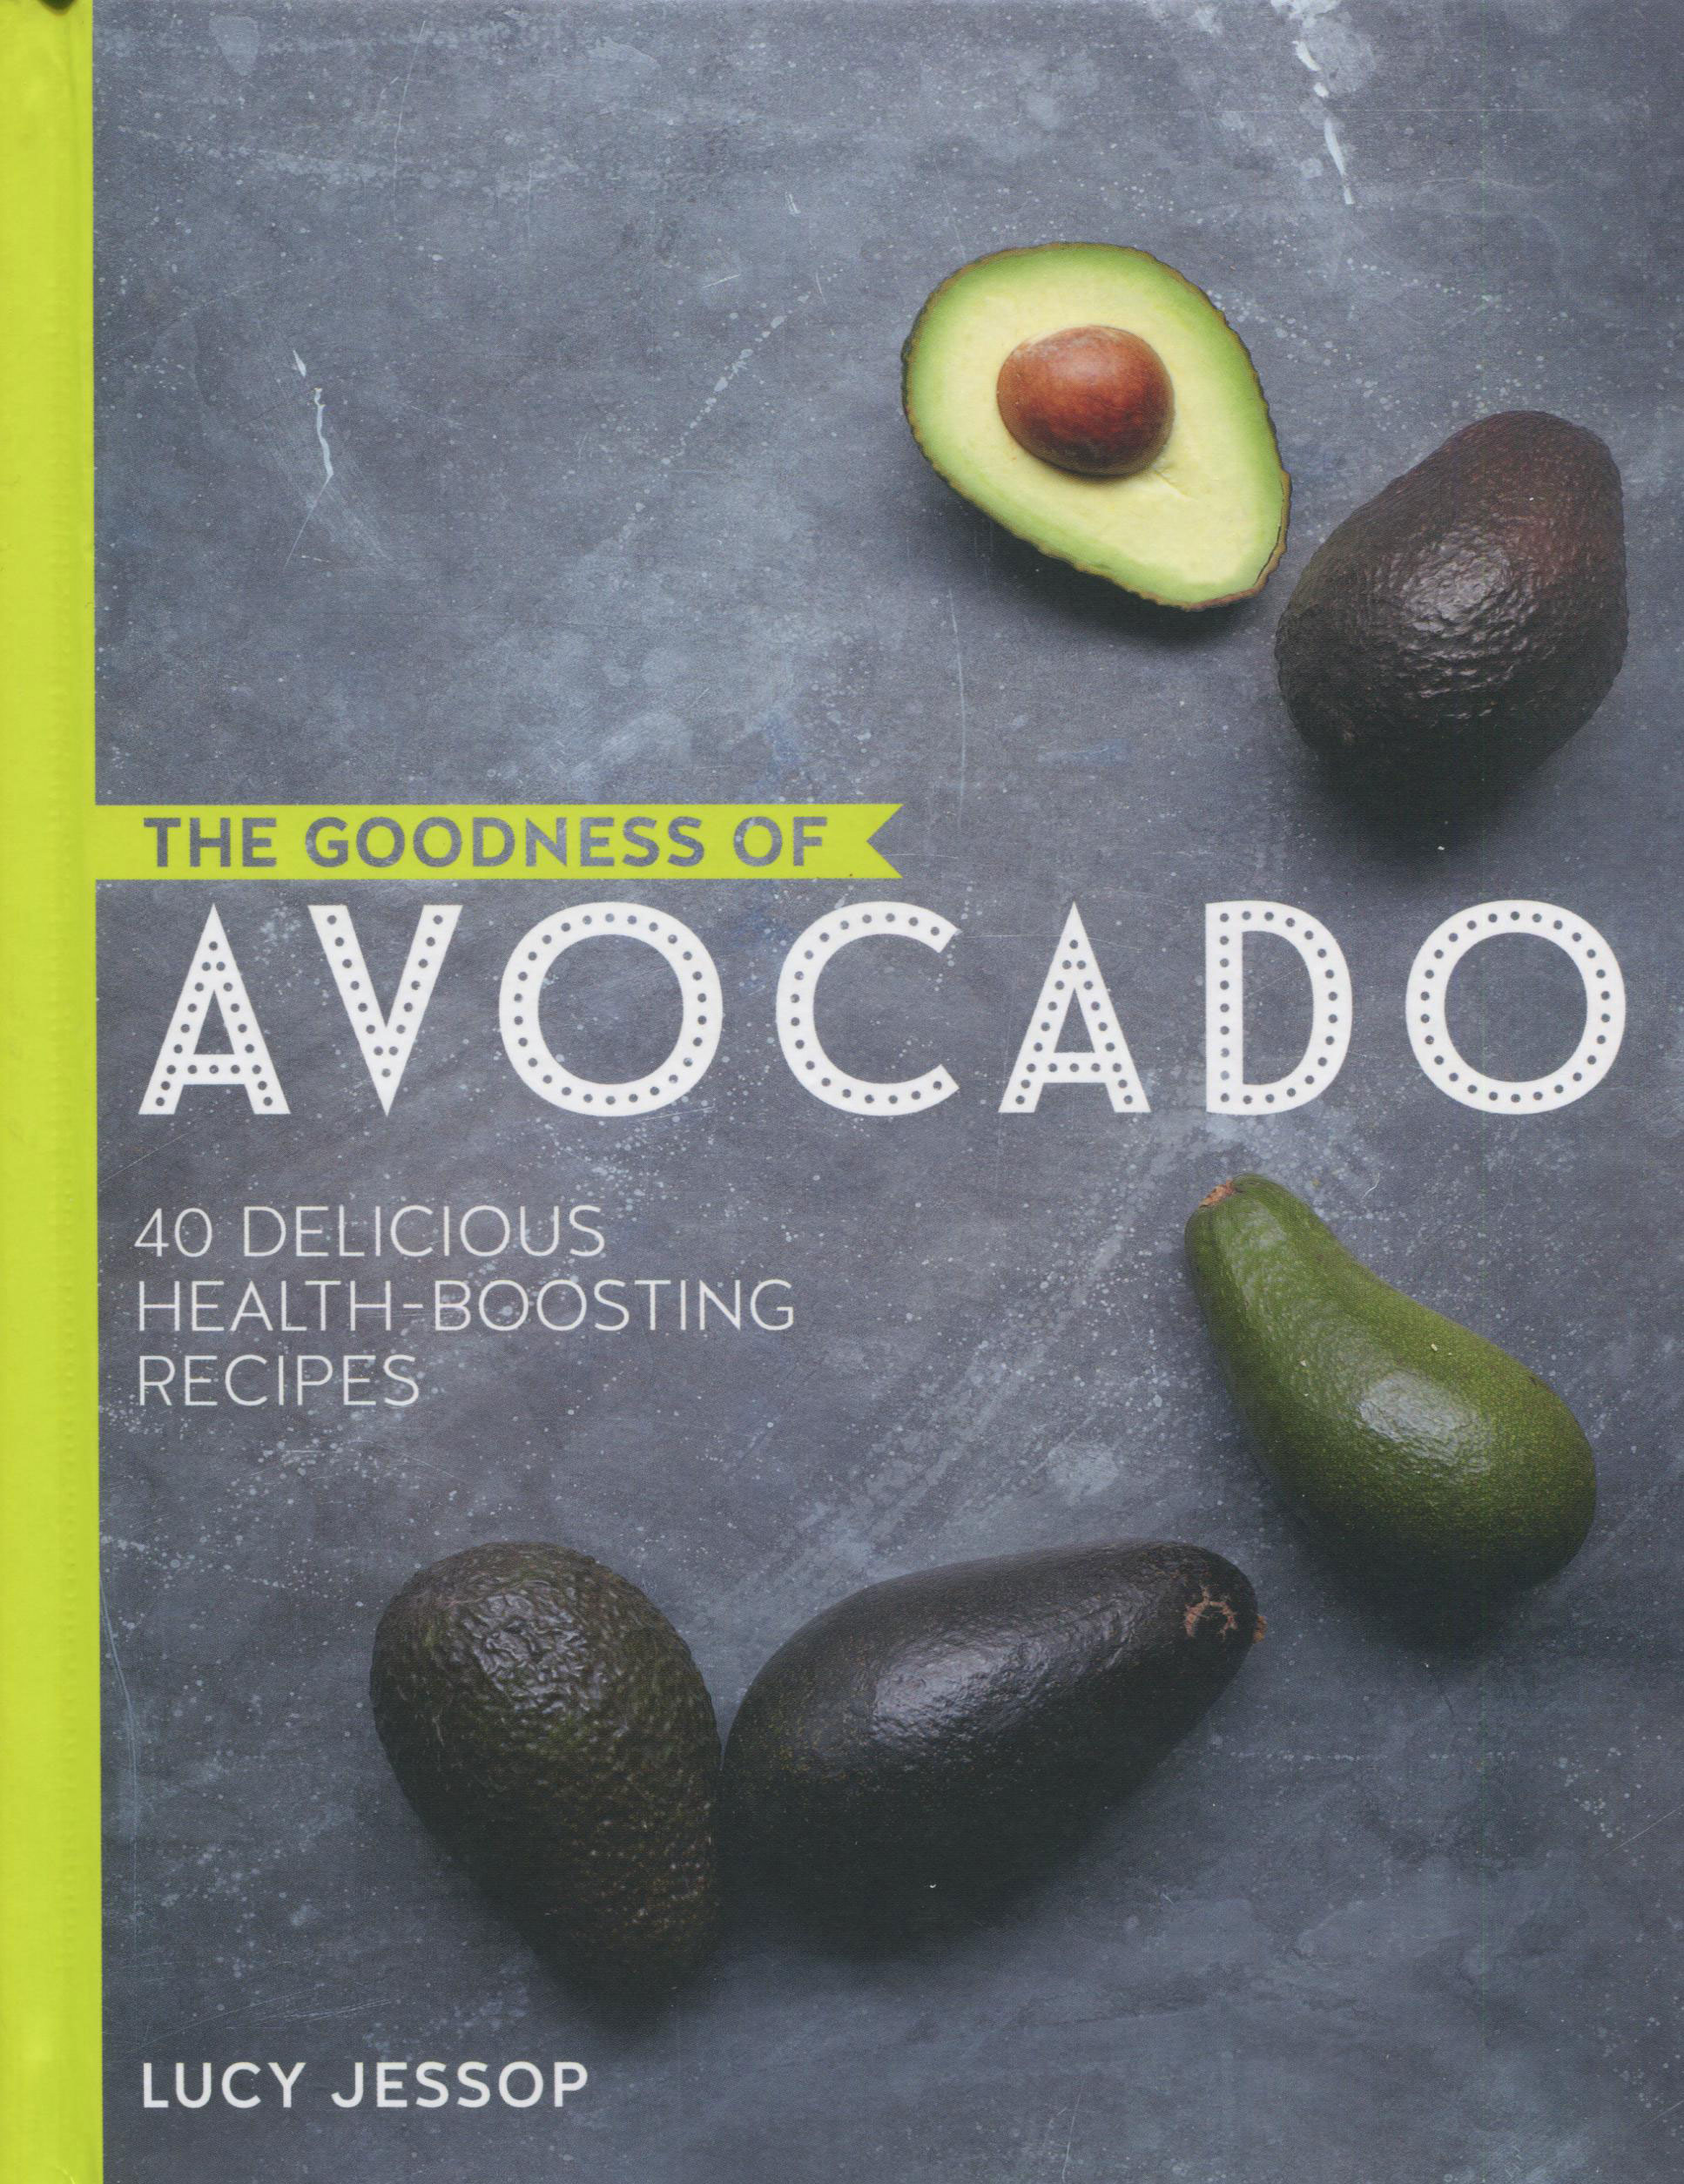 A Summer Cookbook for You While We Are in Yellowstone: The Goodness of Avocado